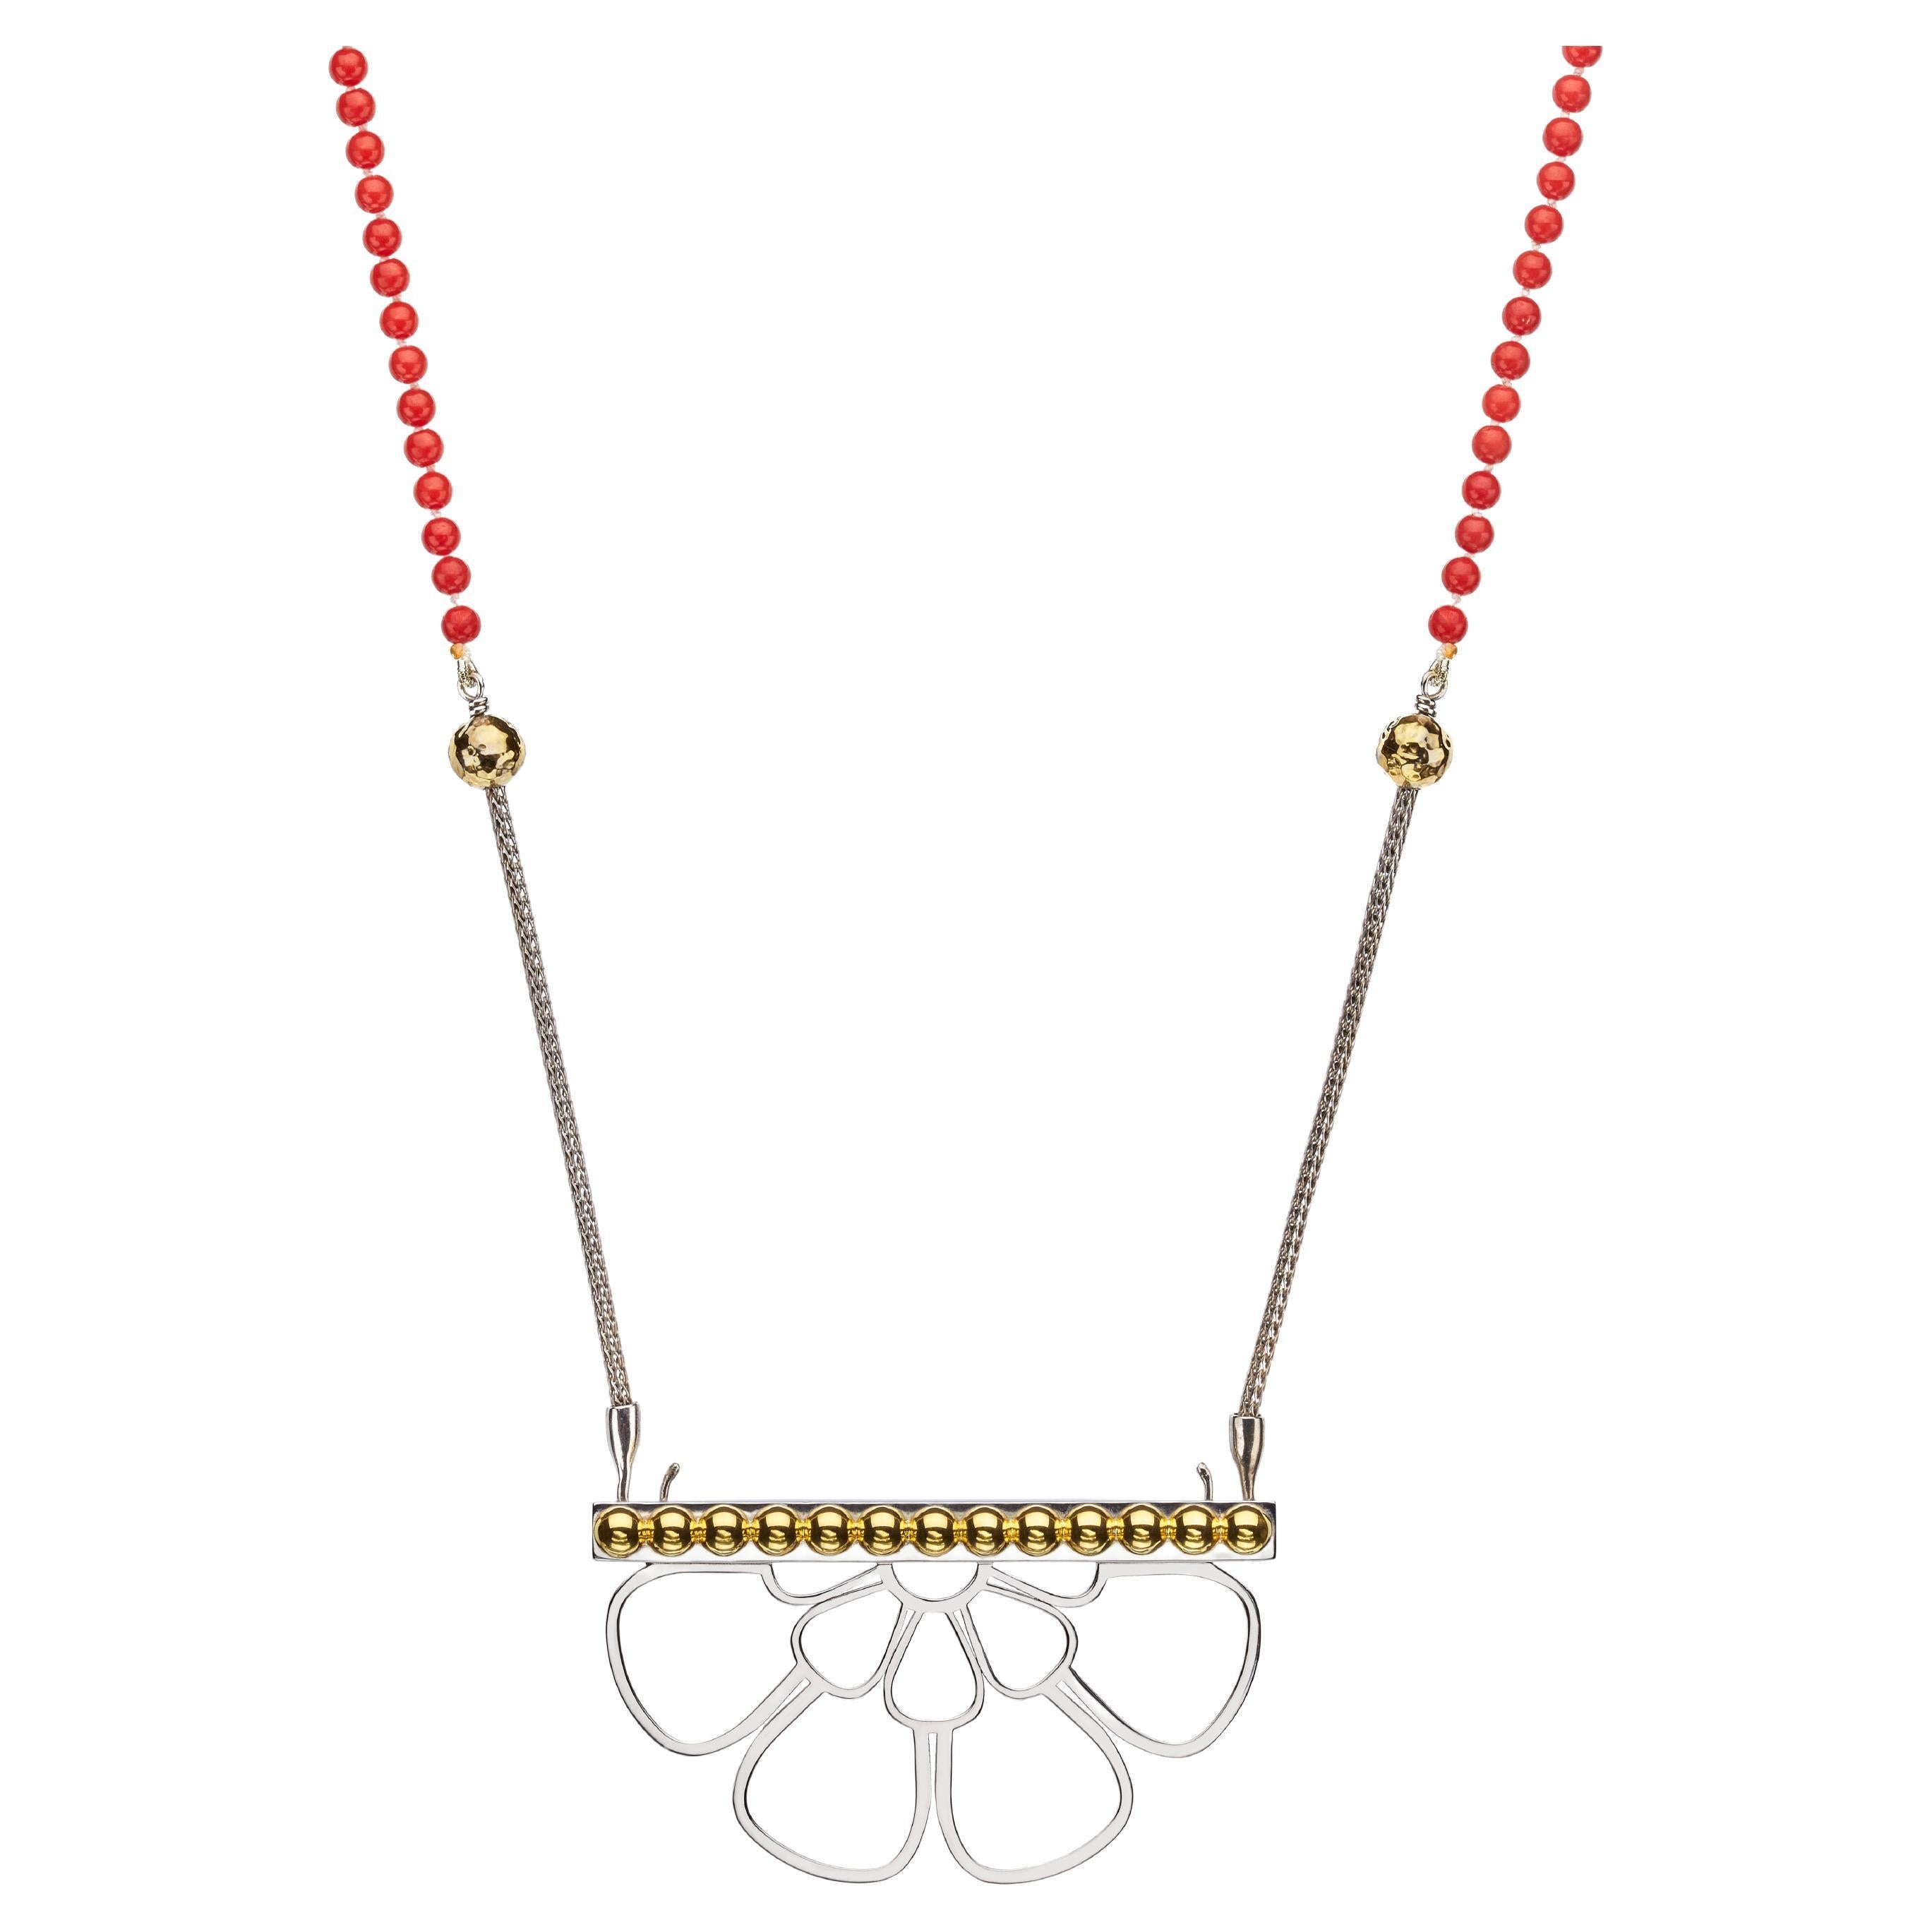 Ancient Greek Rosette Necklace Object D'Art with Red Coral 18kt Gold and Silver For Sale